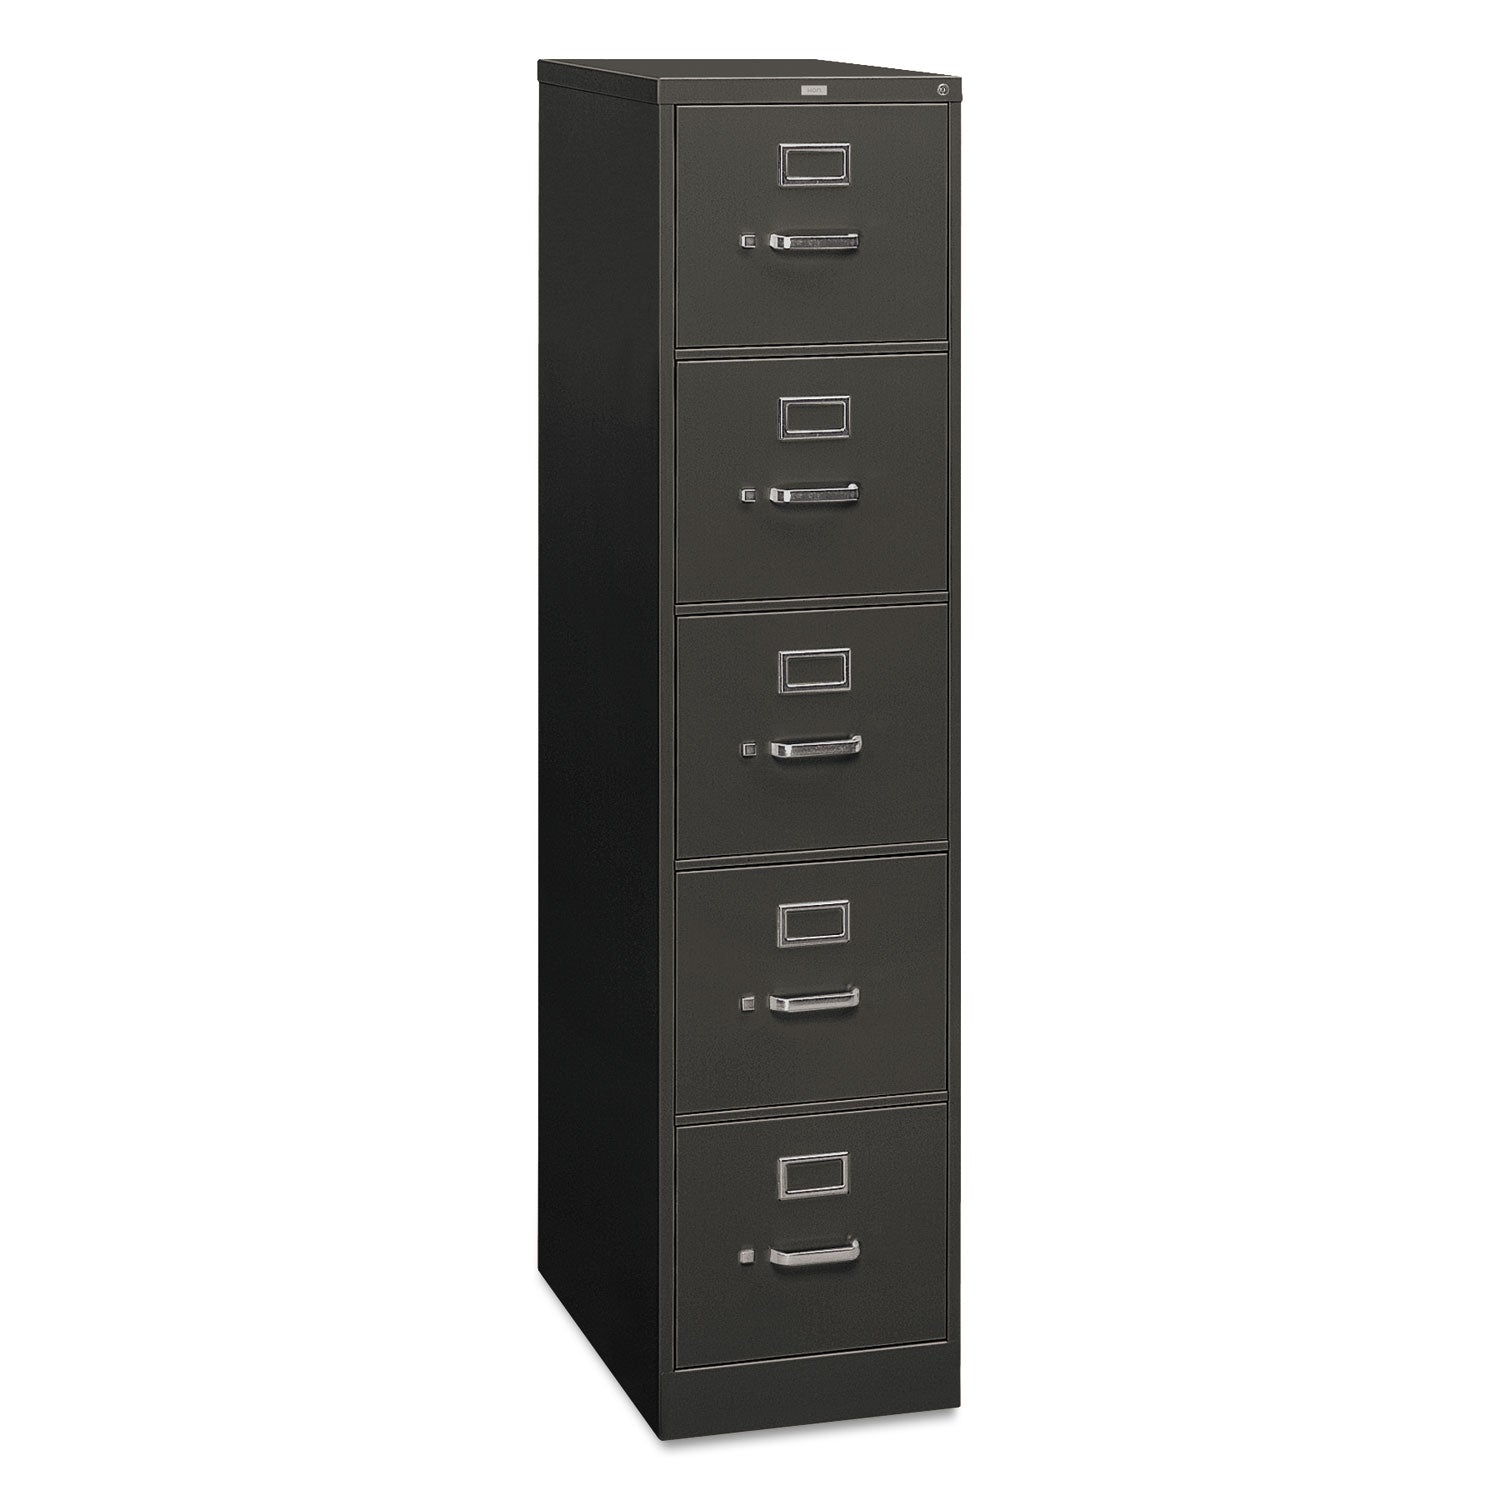 310 Series Vertical File, 5 Letter-Size File Drawers, Charcoal, 15" x 26.5" x 60 - 